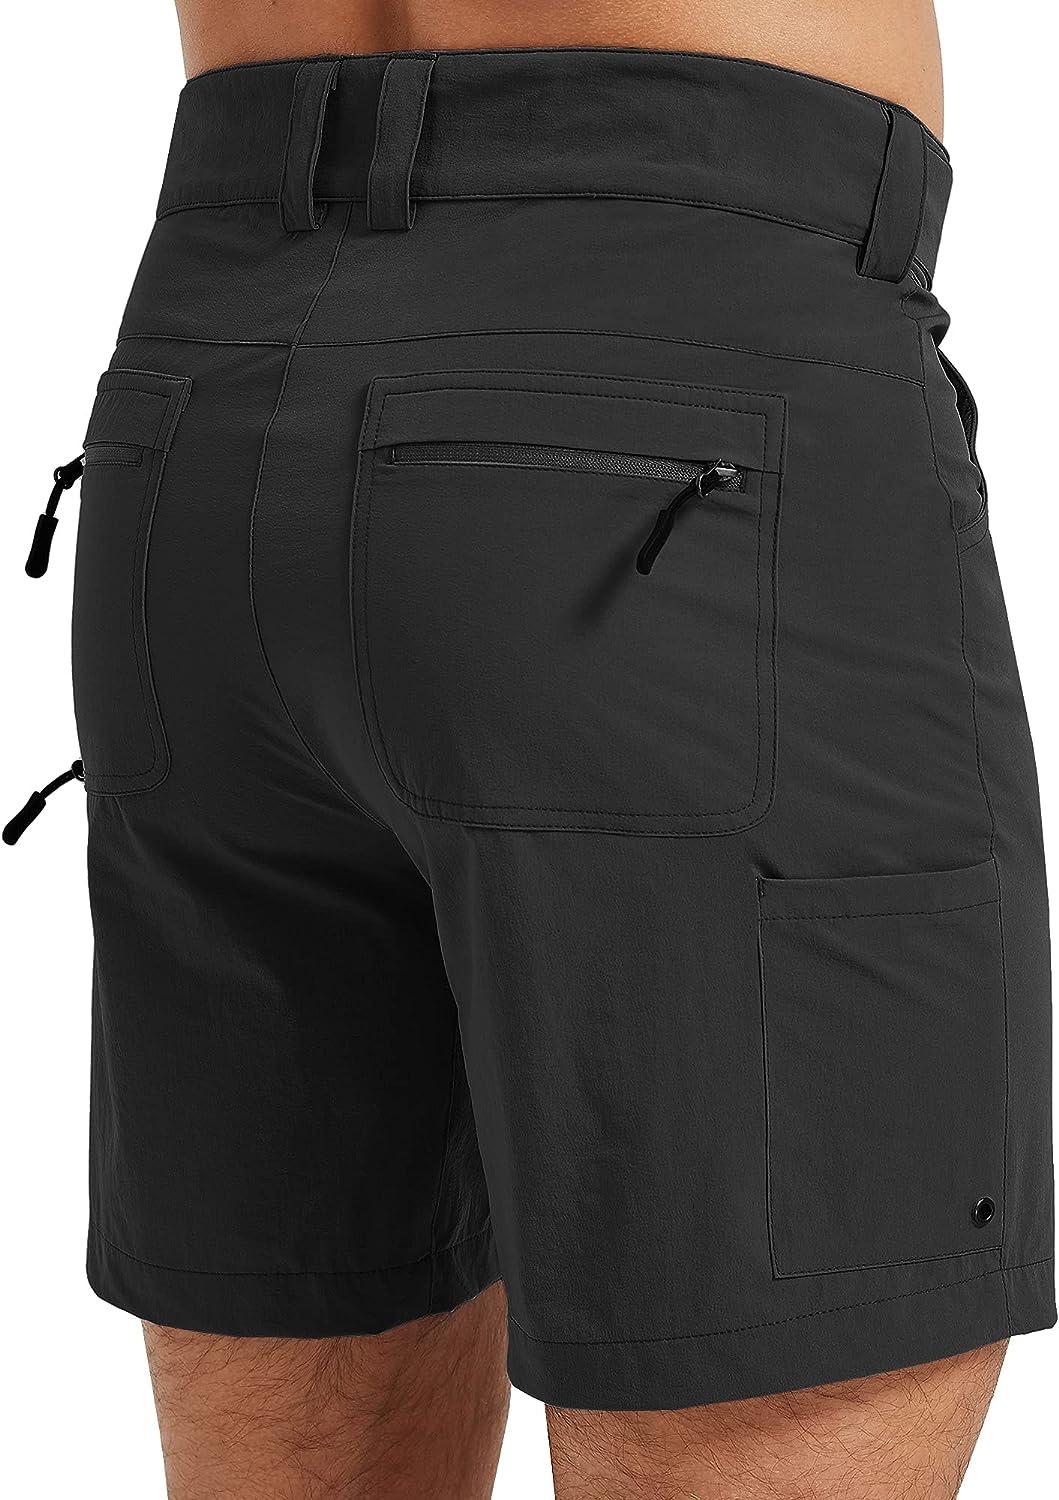 FitsT4 Mens Cargo Hiking Shorts 7 Inch Stretch Water Resistant Quick Dry  Lightweight Outdoor Tactical Shorts